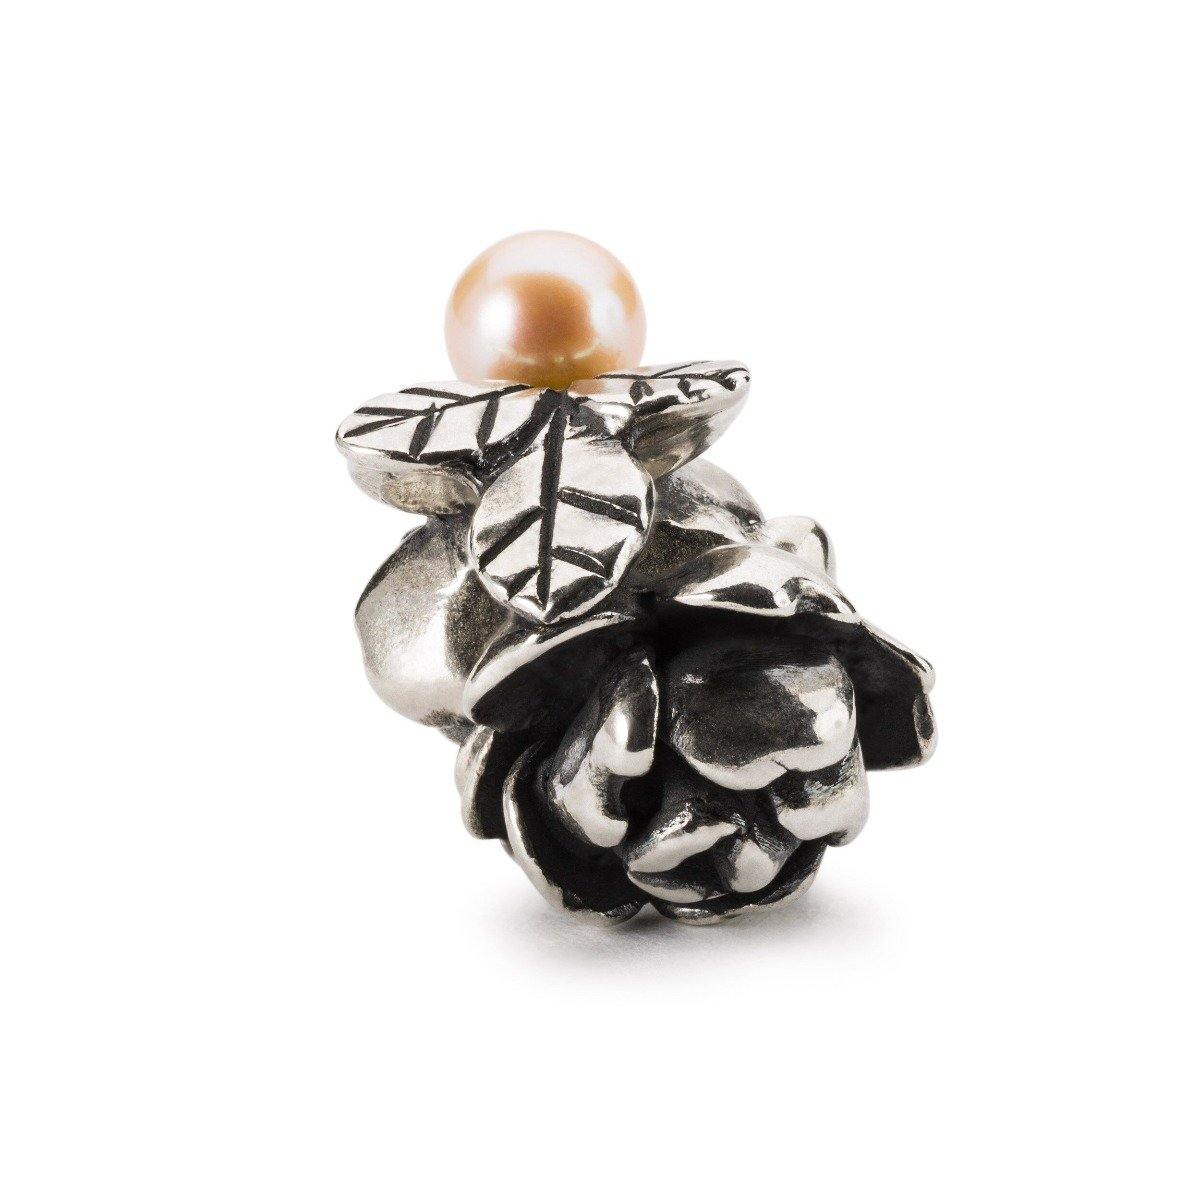 Beads | Rosa d'amore  | Trollbeads | TAGBE-00274 - FdM Easy